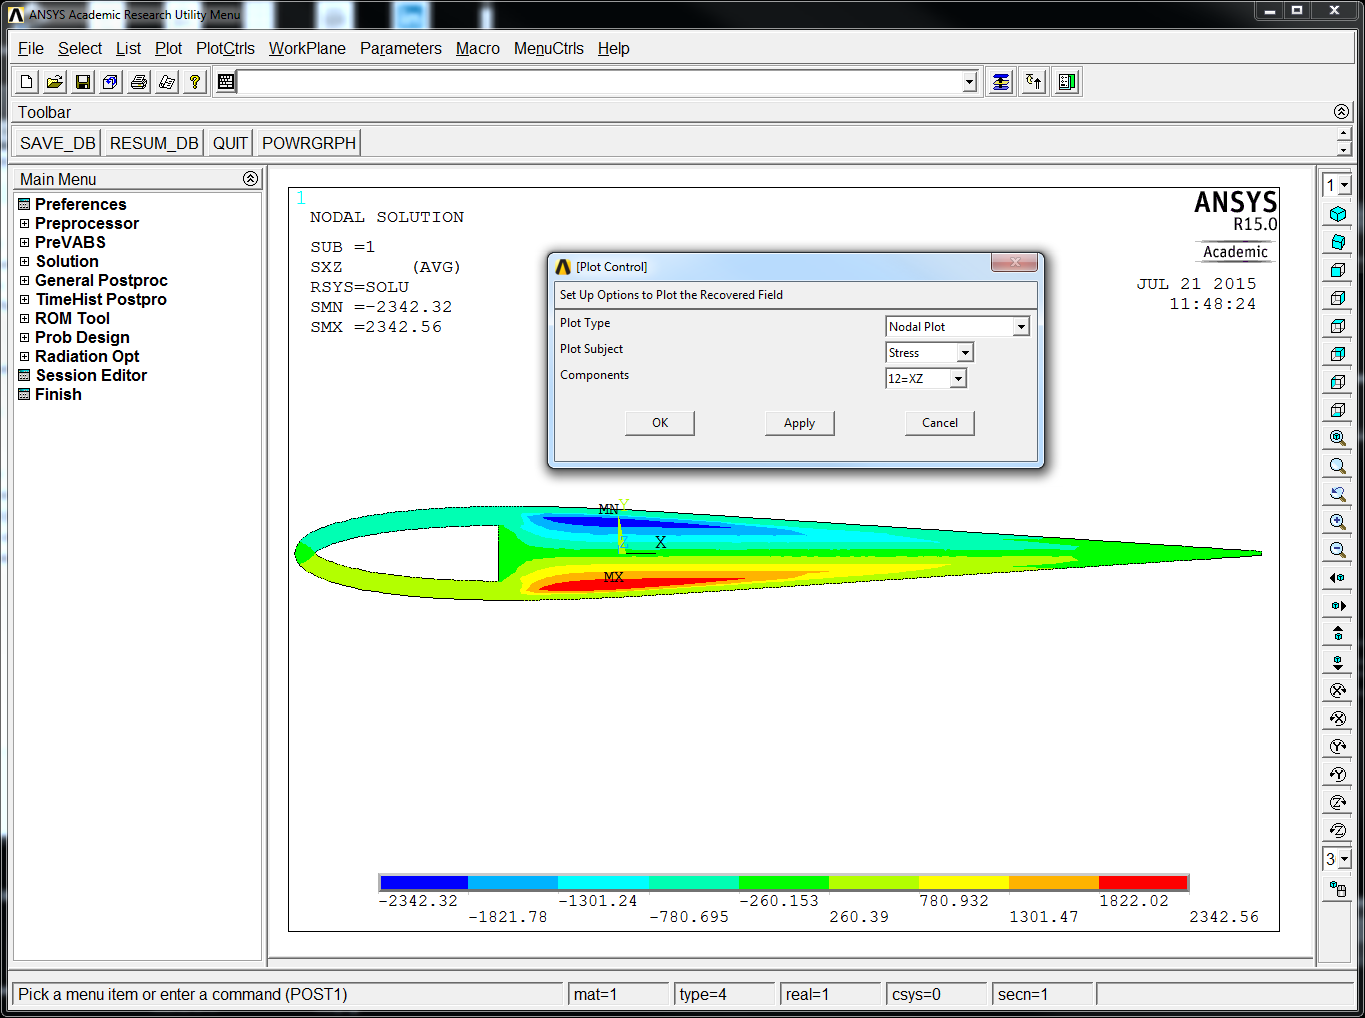 ANSYS-VABS Graphic User Interface (GUI) Official Release Logo